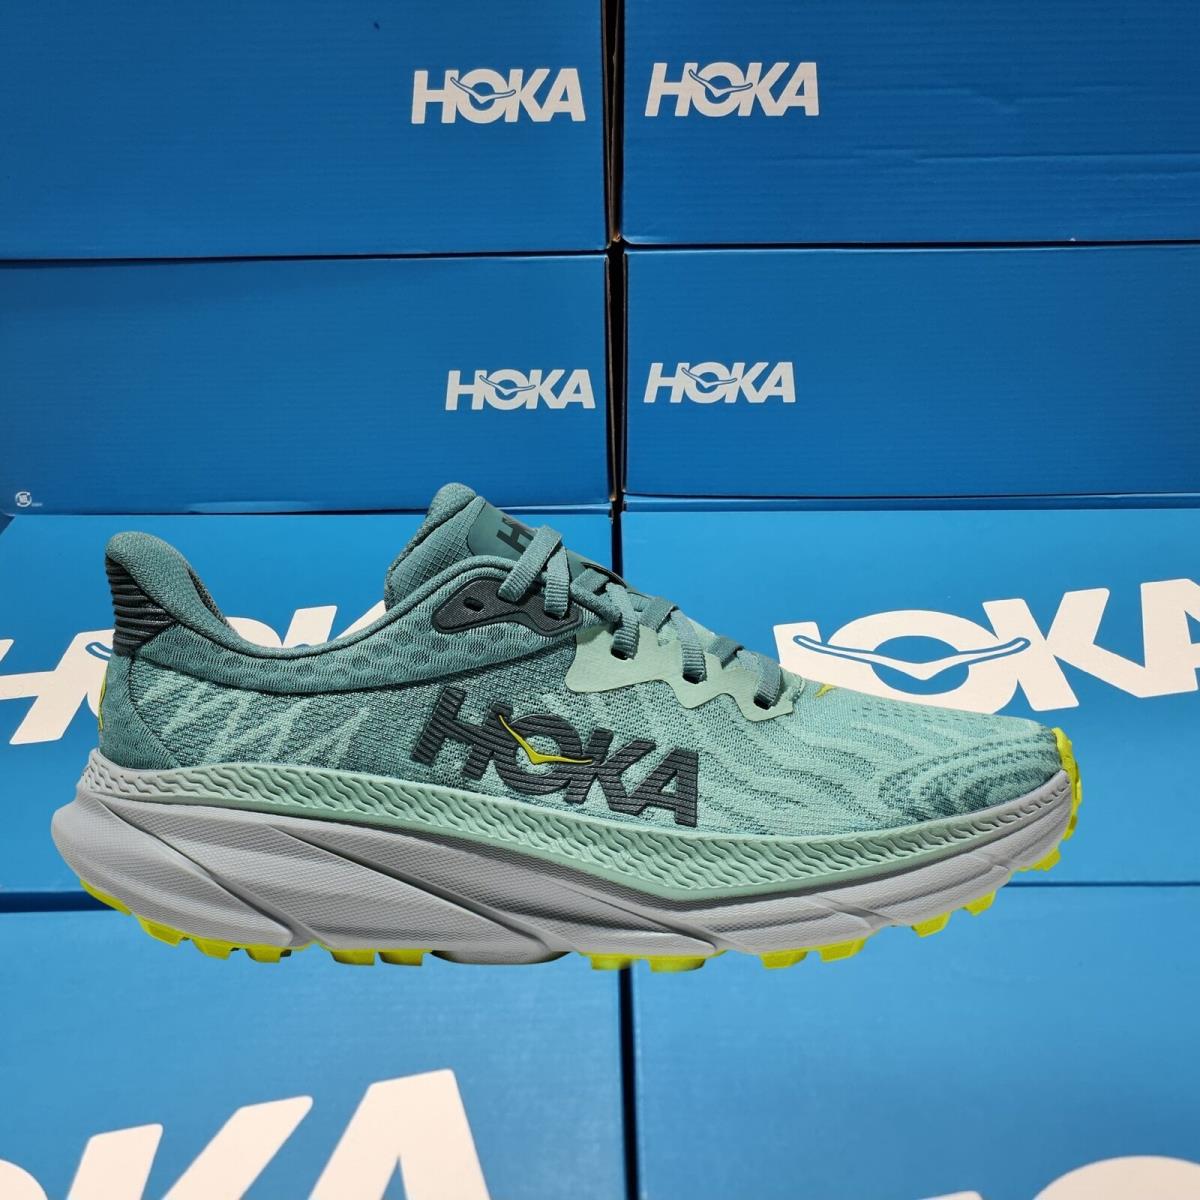 Hoka One One Challenger Atr 7 Wide (d) One One Challenger Atr 7 Wide D 1134500/MGTR Trail Running Shoes